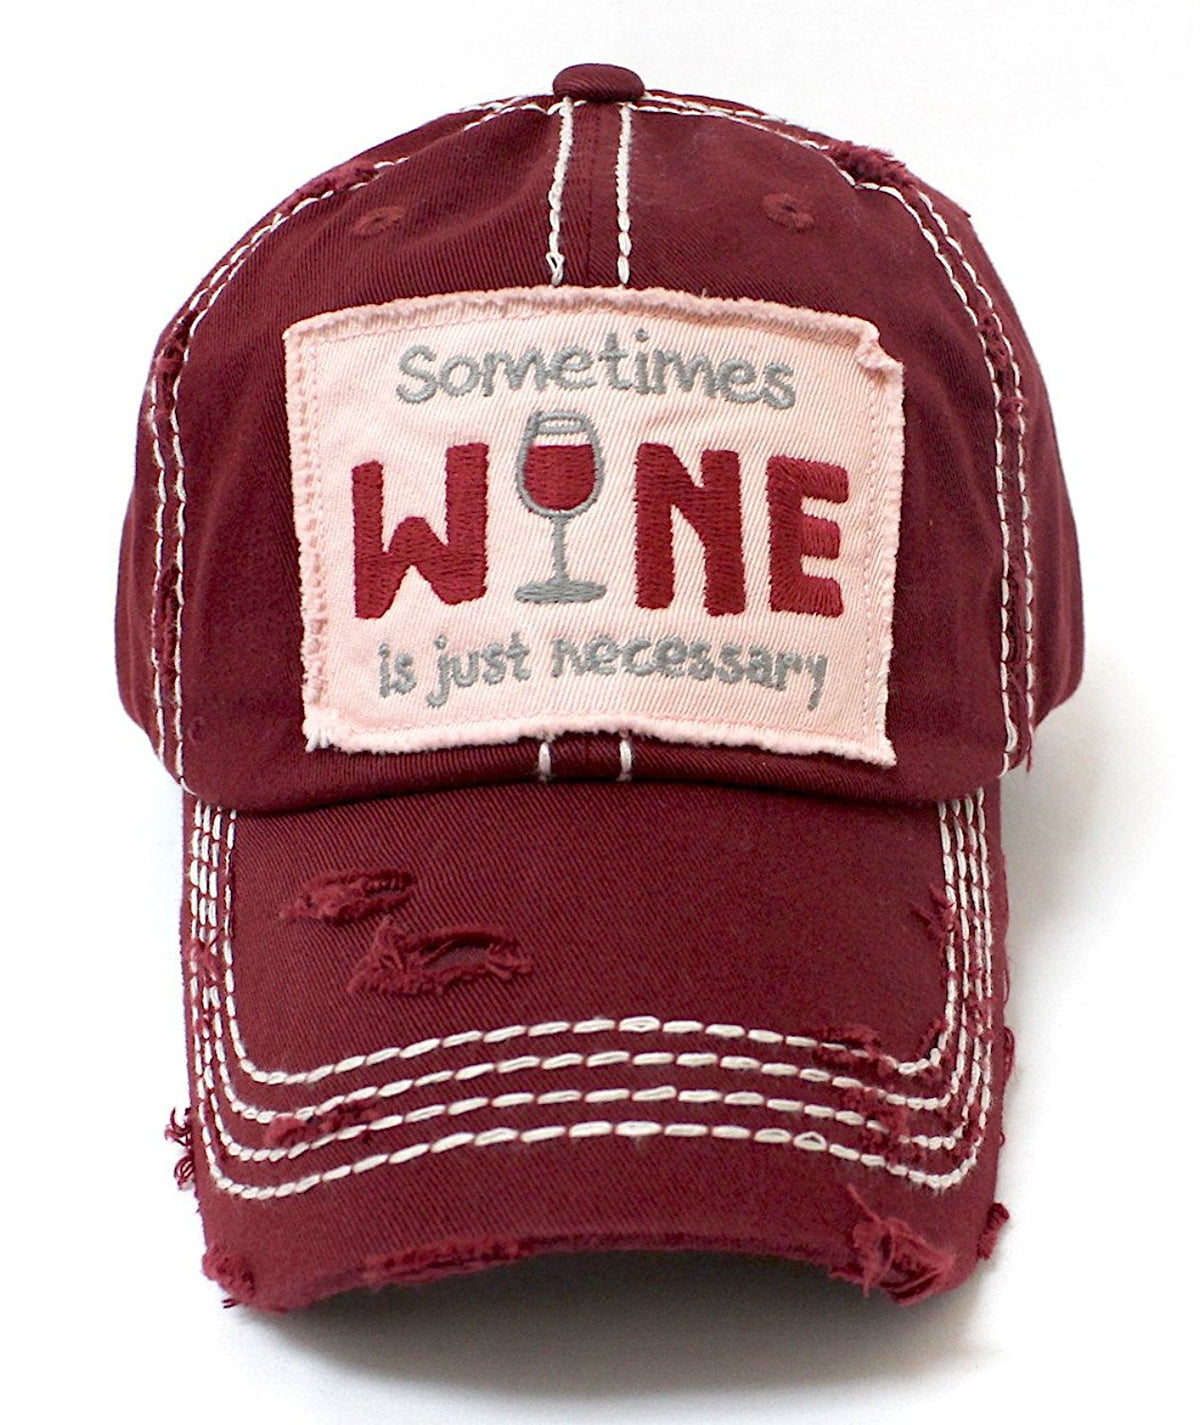 CAPS 'N VINTAGE Deep Wine-Red Sometimes Wine is Just Necessary Patch Embroidery Hat w/Wine Glass Monogram Back - Caps 'N Vintage 